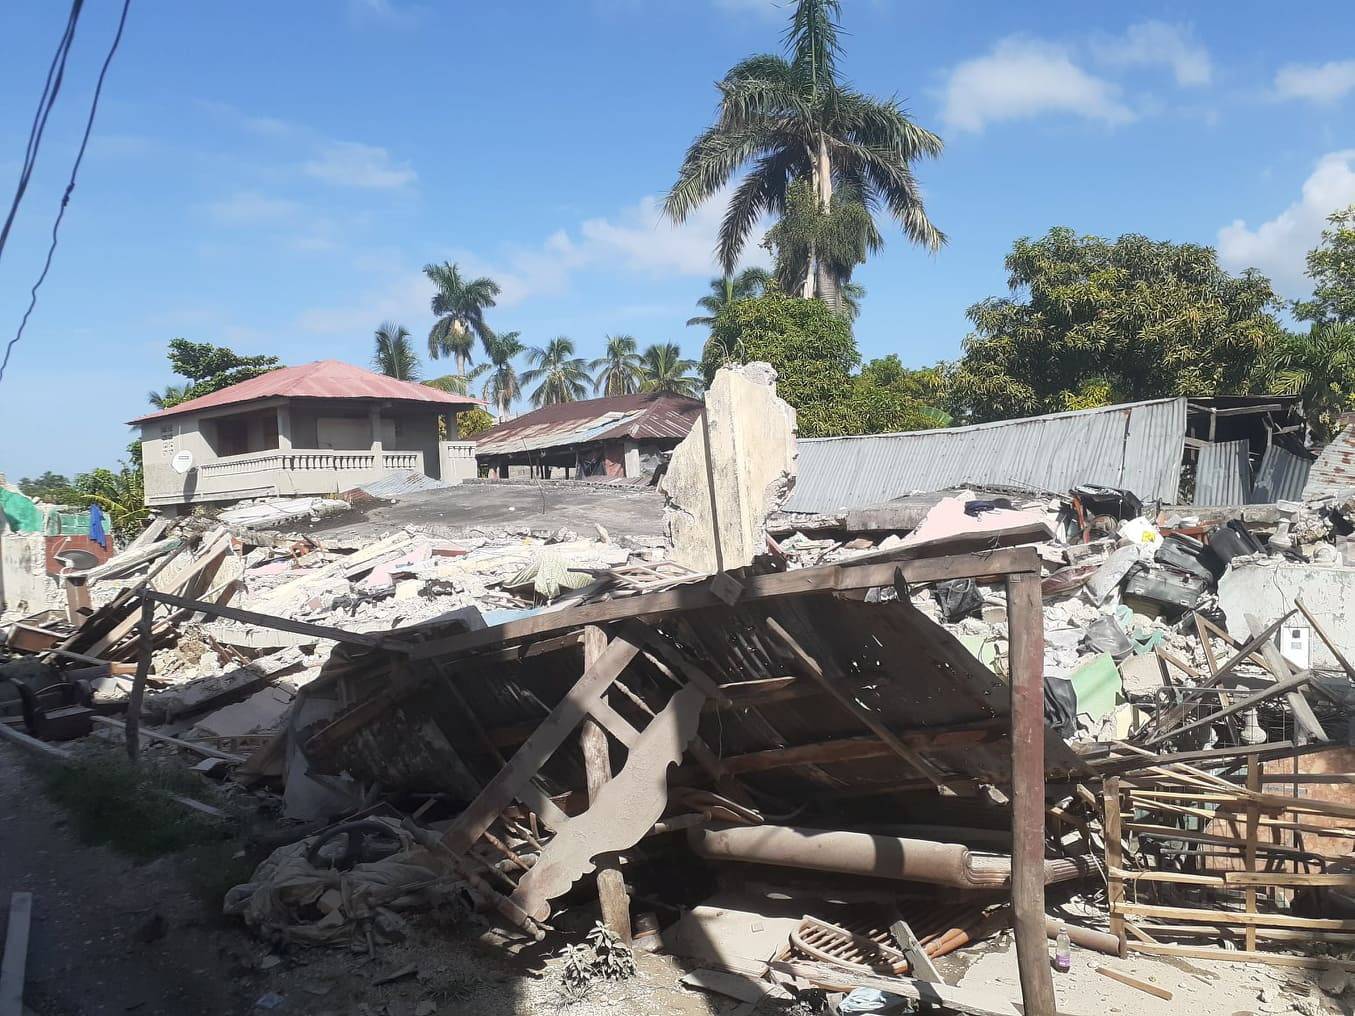 Damage is seen in an area after a major earthquake struck southwestern Haiti, in Les Cayes